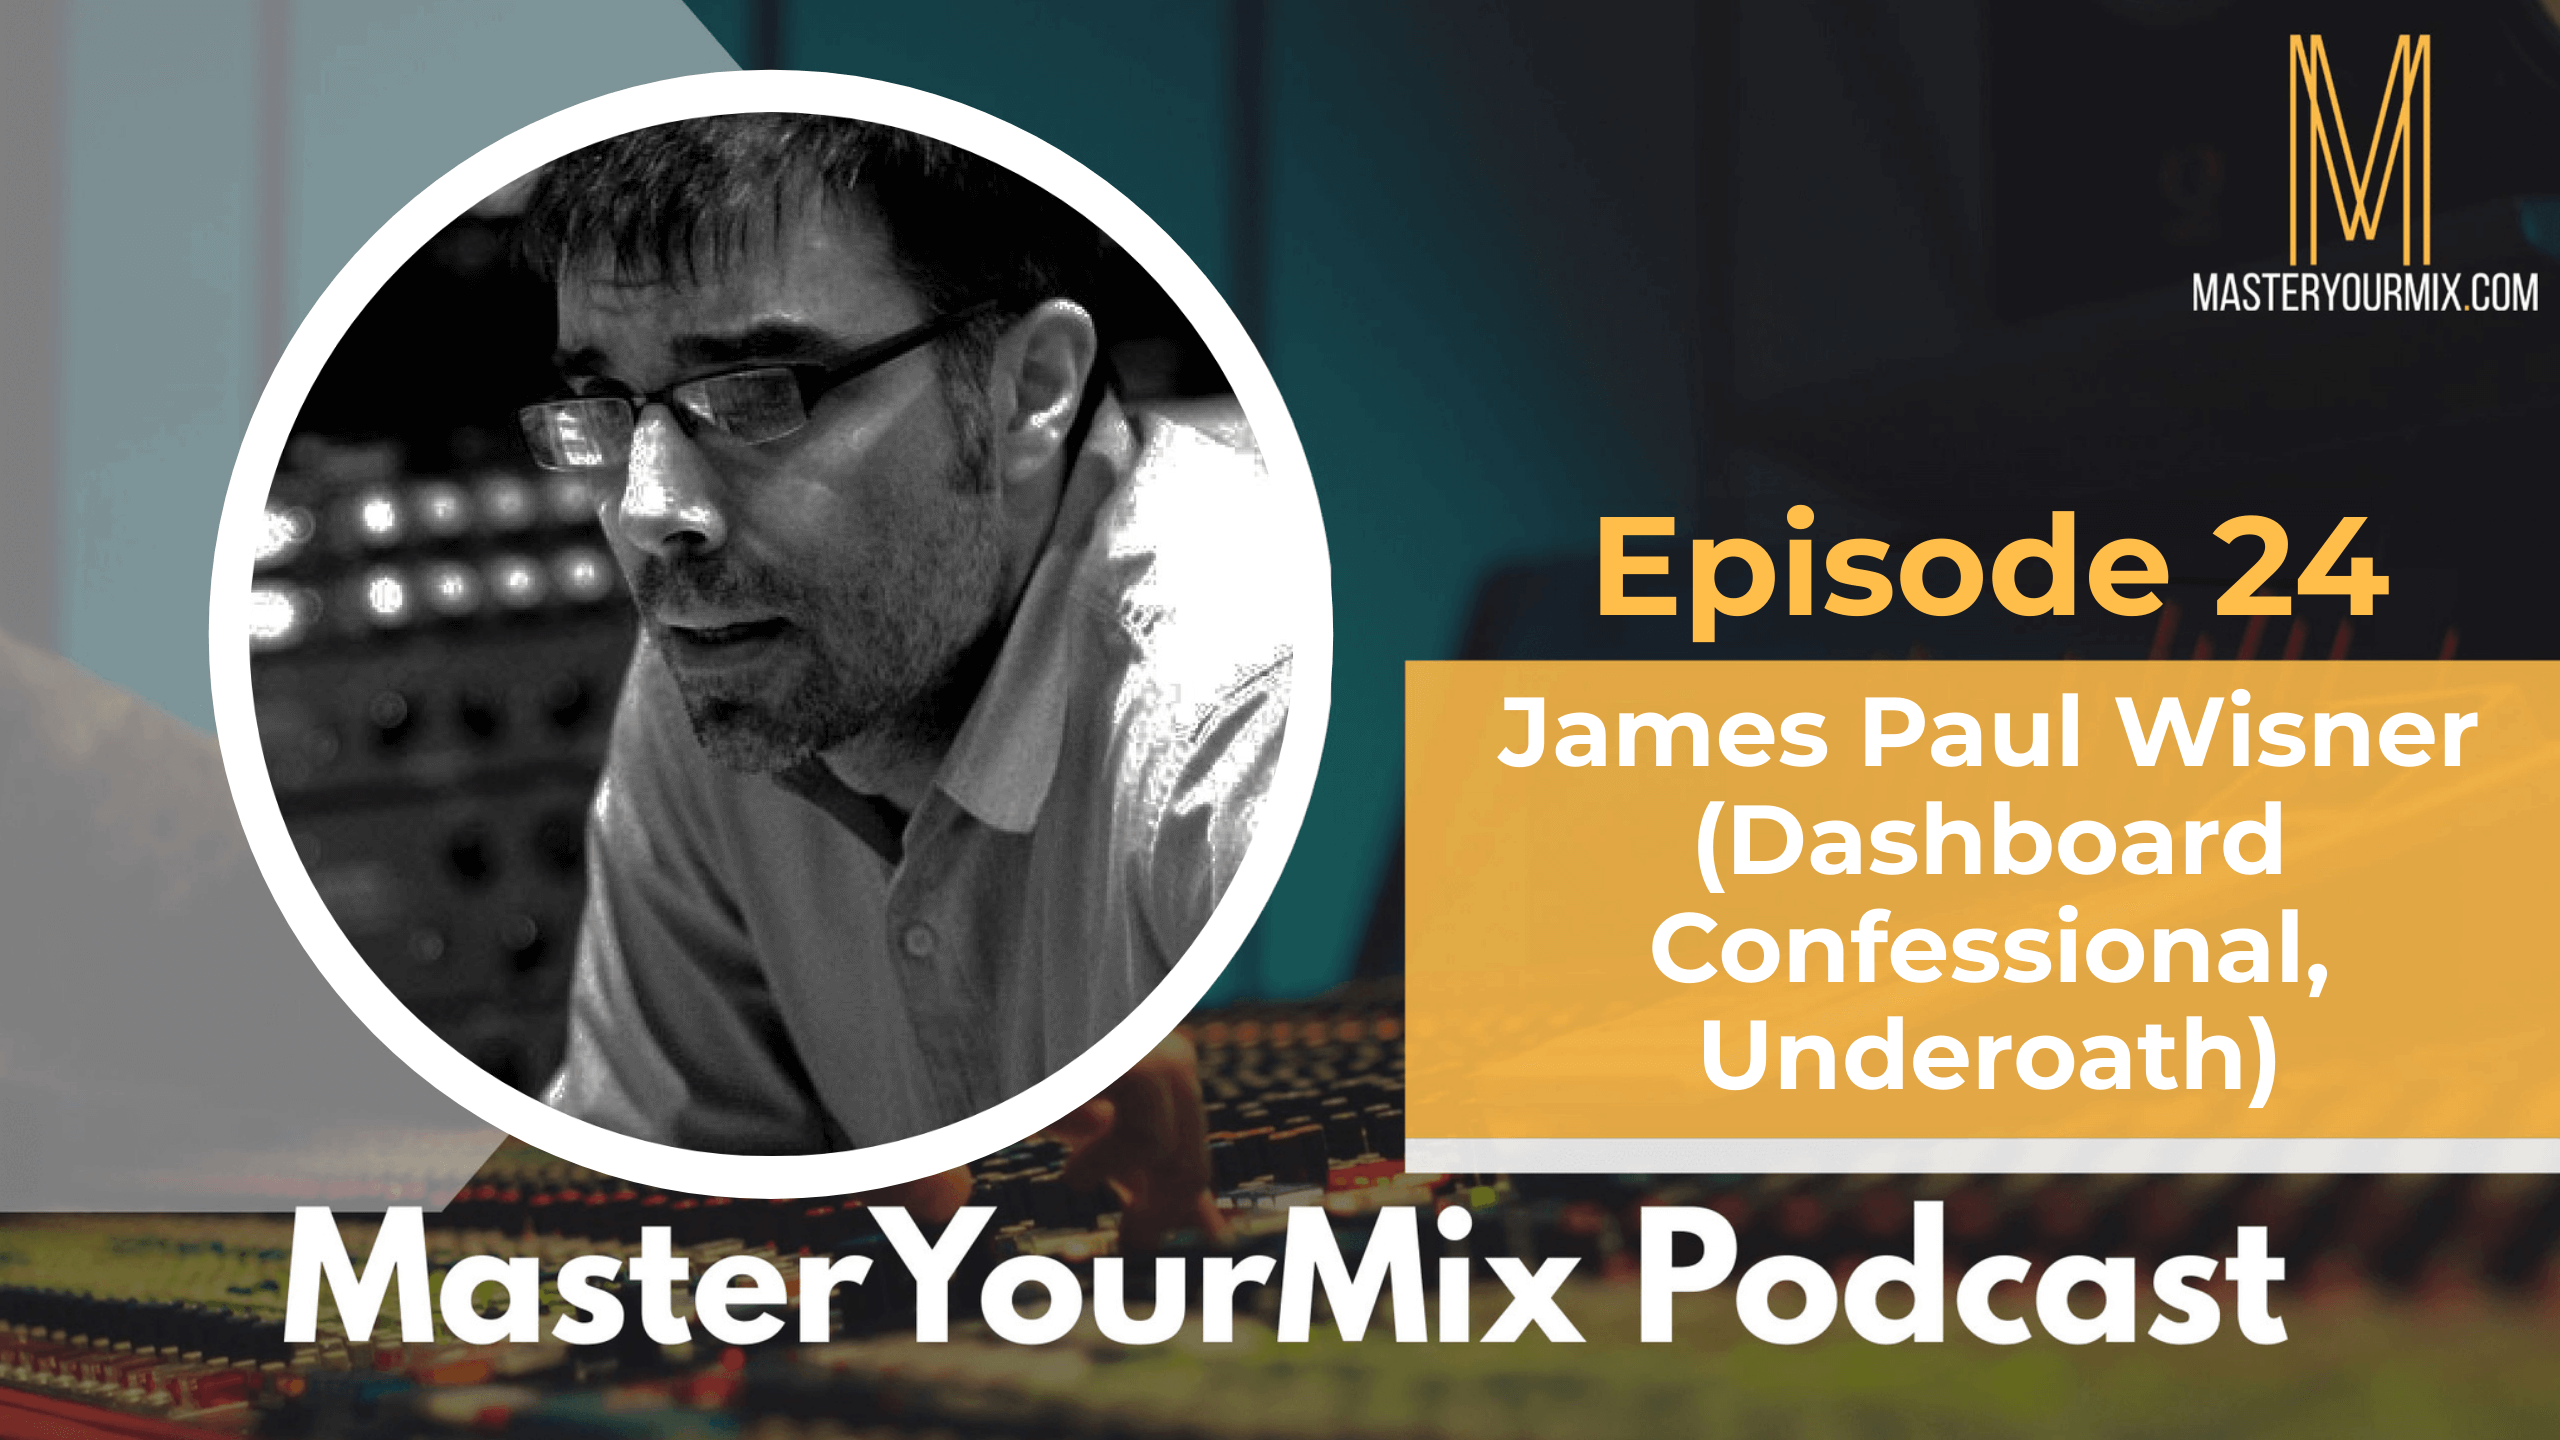 master your mix podcast, ep 24 james paul wisner